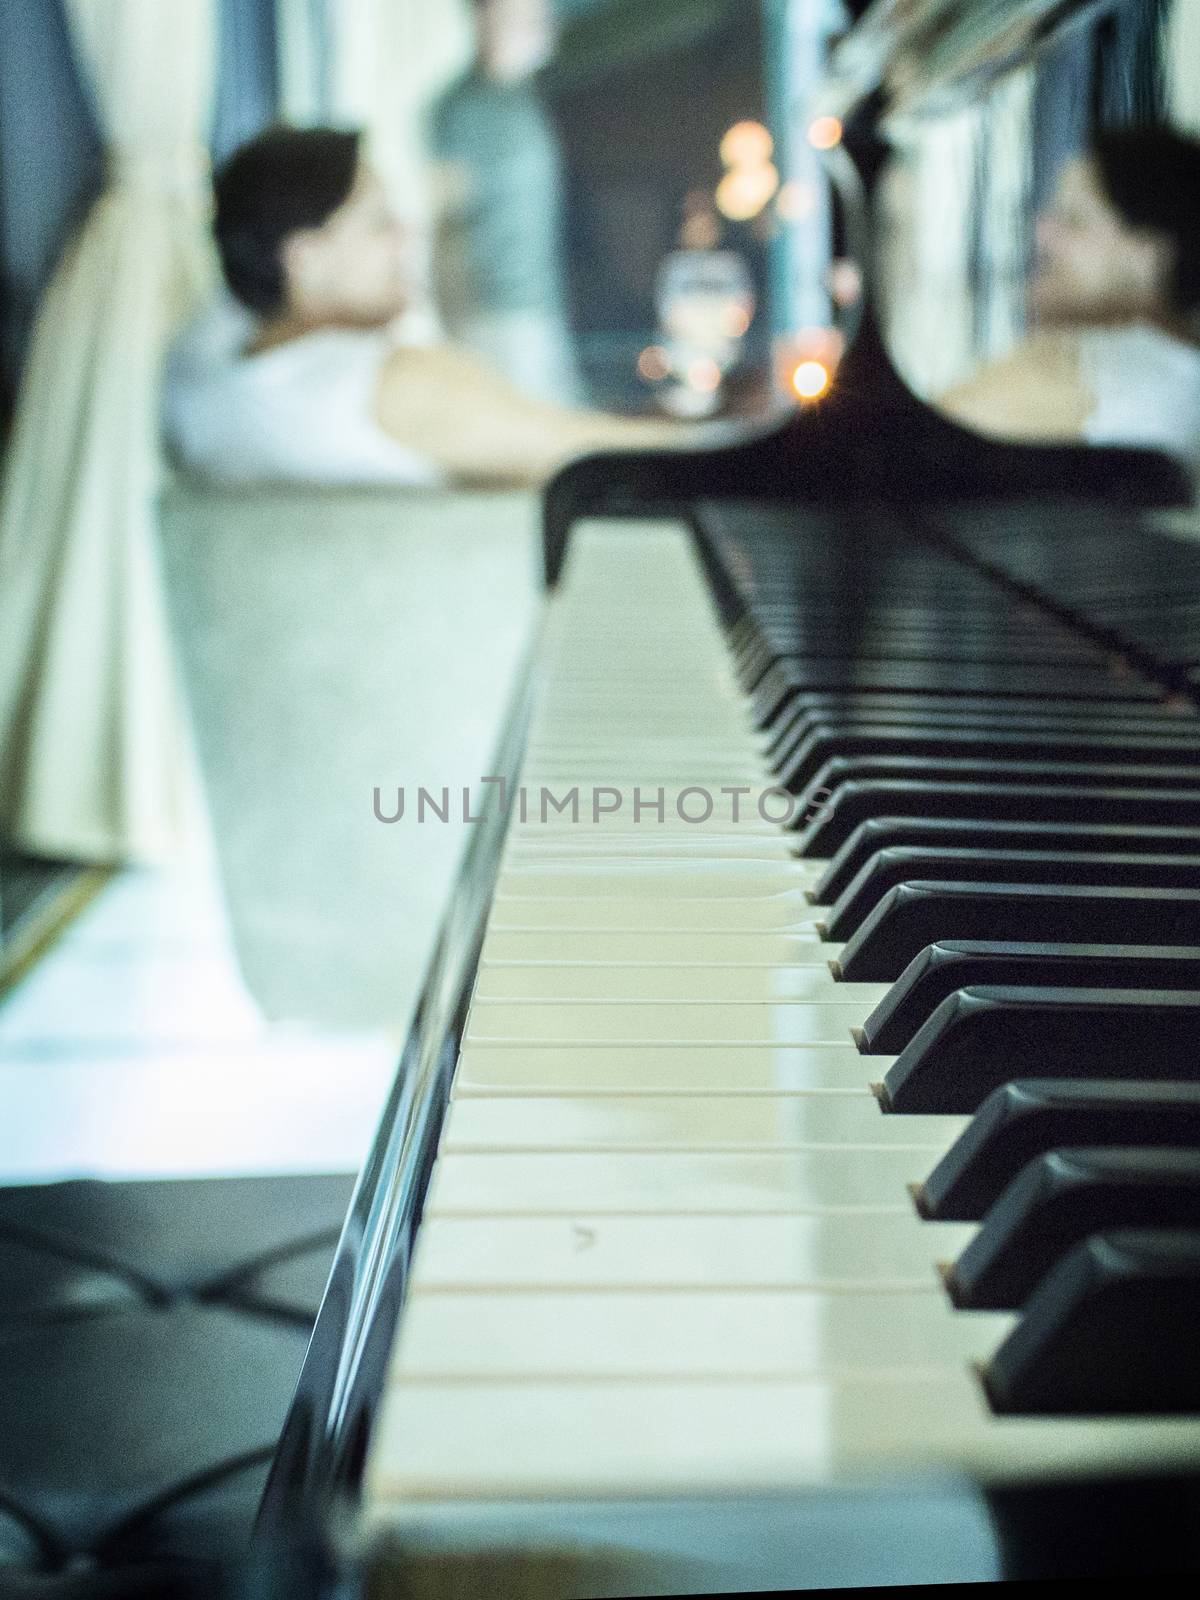 Black piano with blurred woman reflected in the piano.